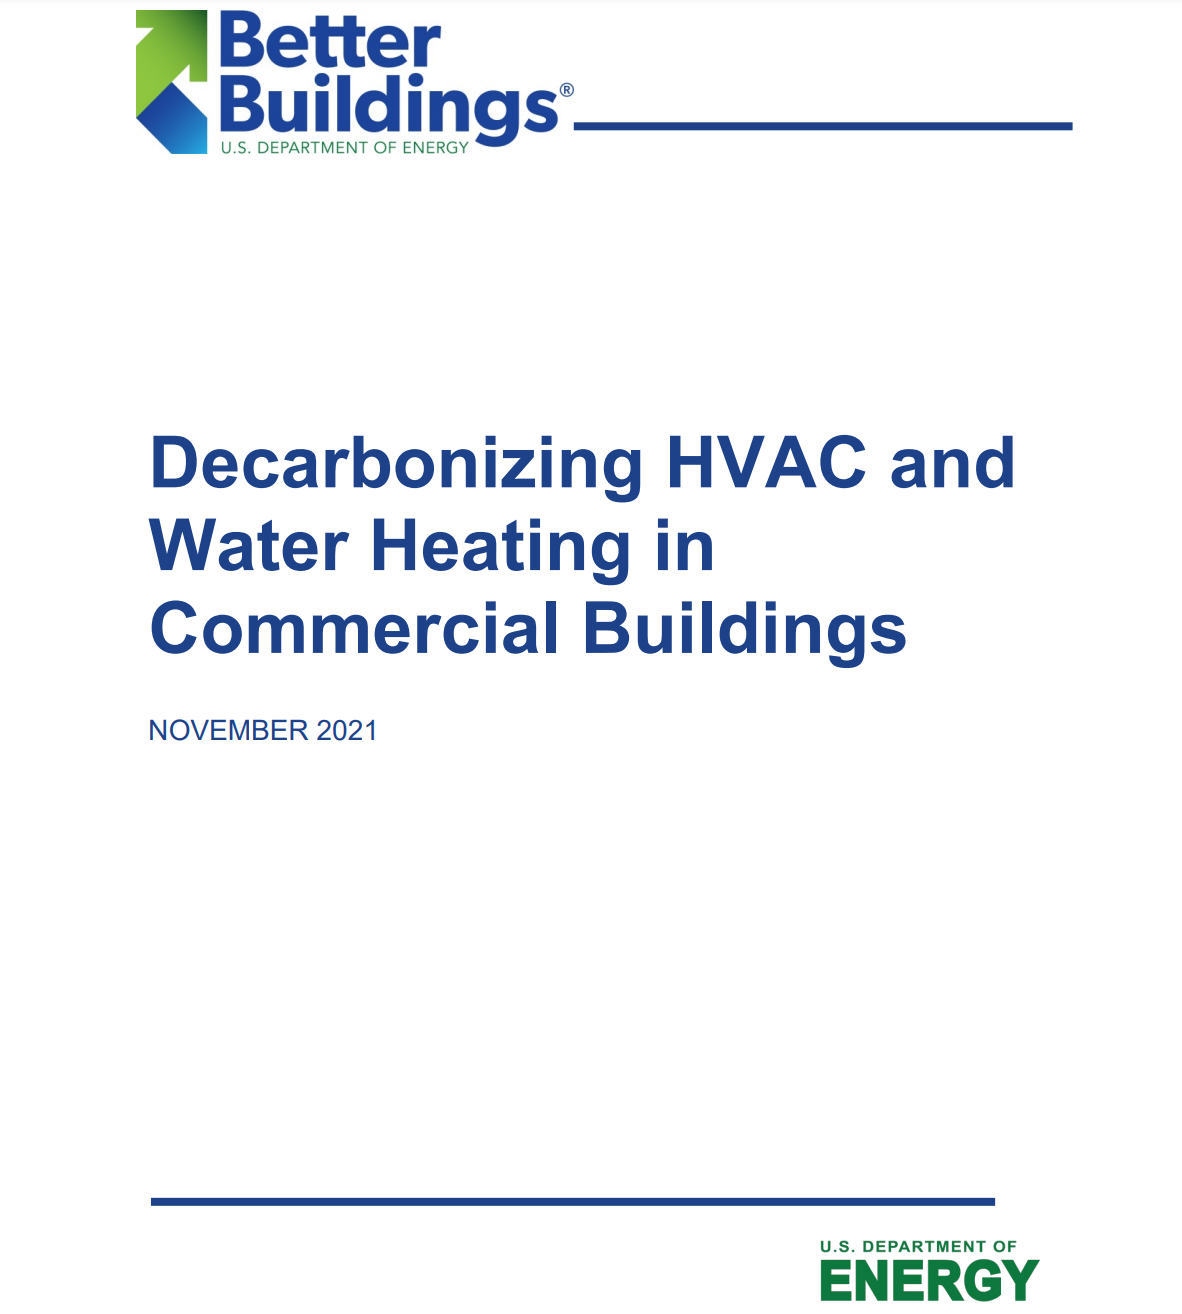 Report cover with title "Decarbonizing HVAC and Water Heating in Commercial Buildings"